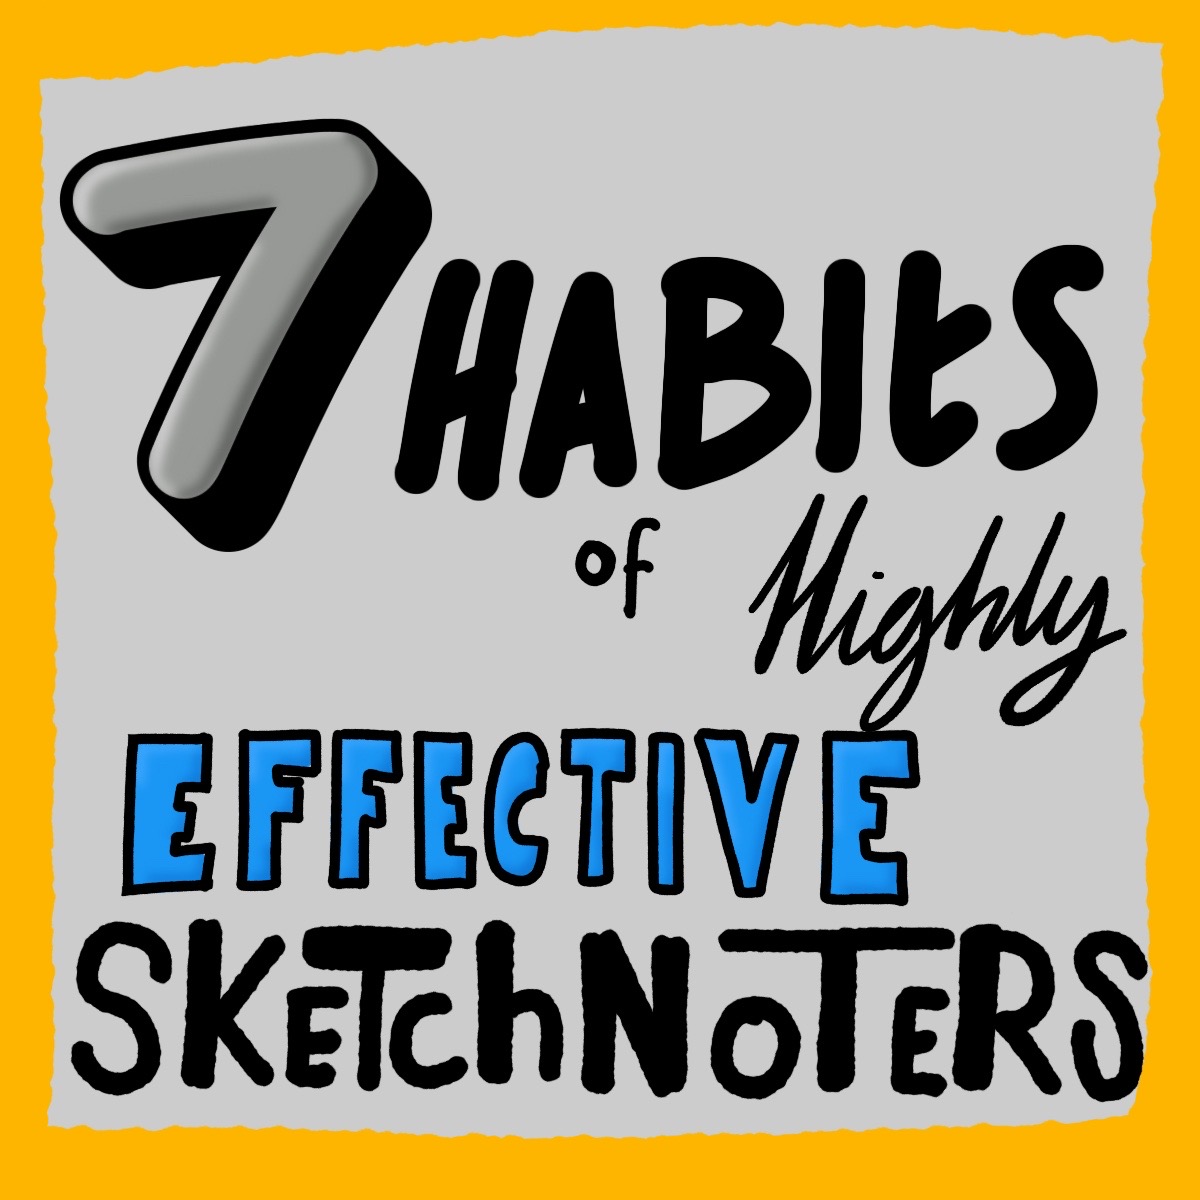 7 Habits of Highly Effective Sketchnoters